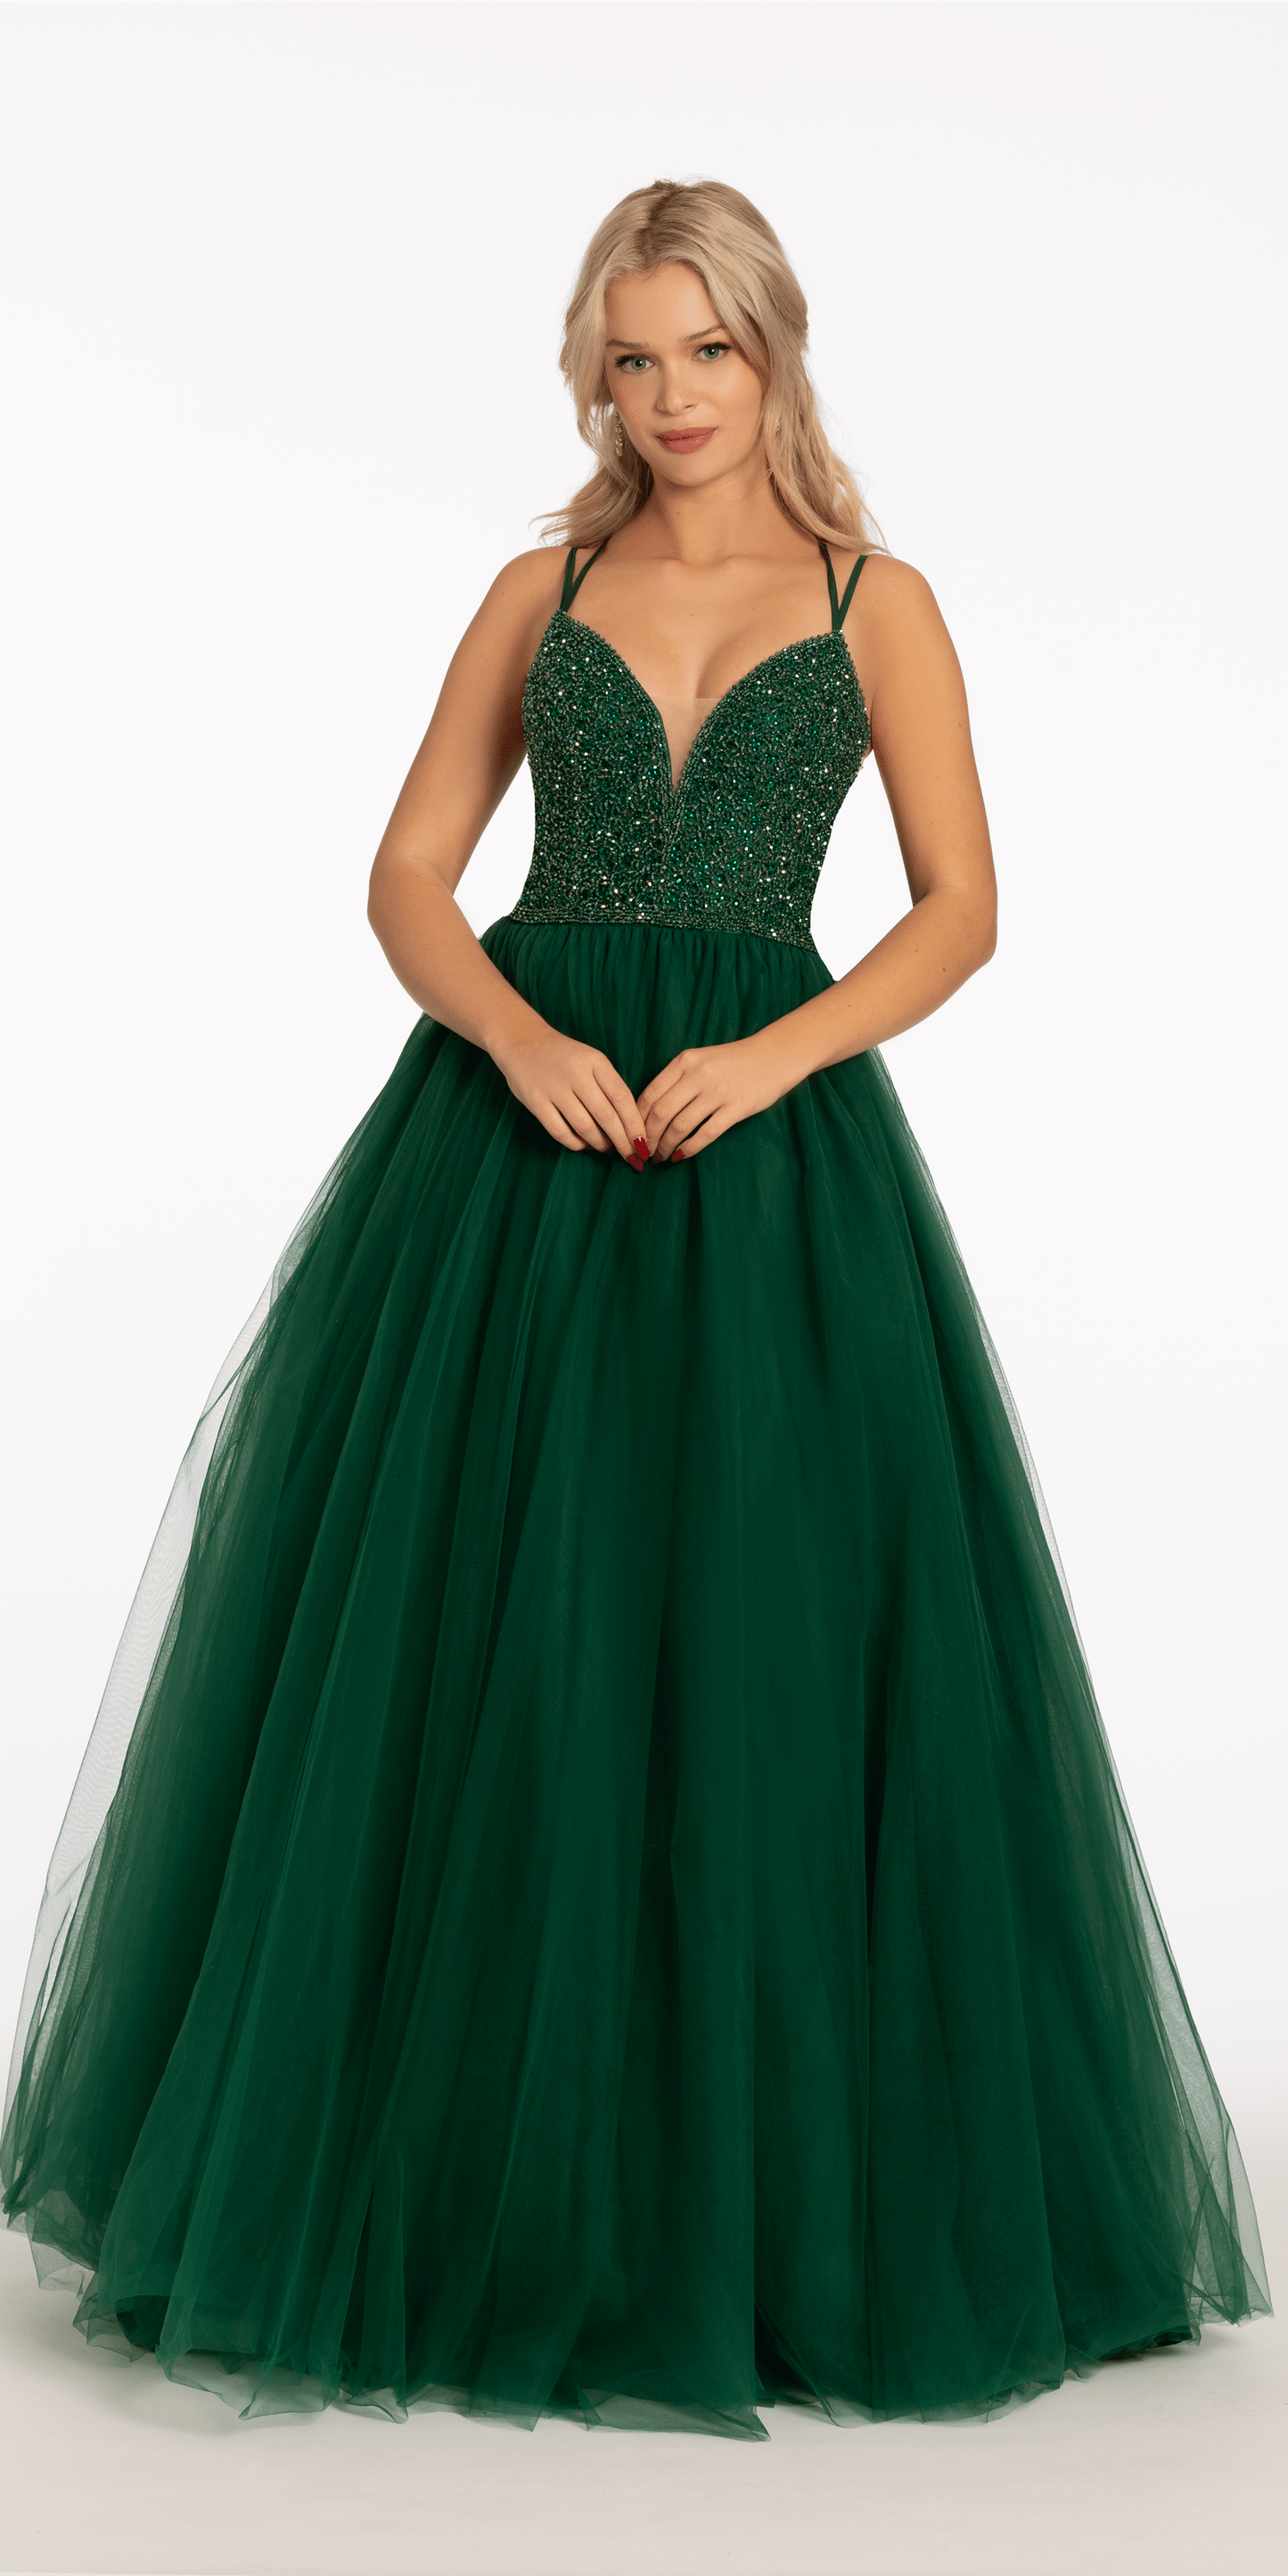 Camille La Vie Beaded Plunging Tulle Lace Up Back Ballgown missy / 2 / emerald